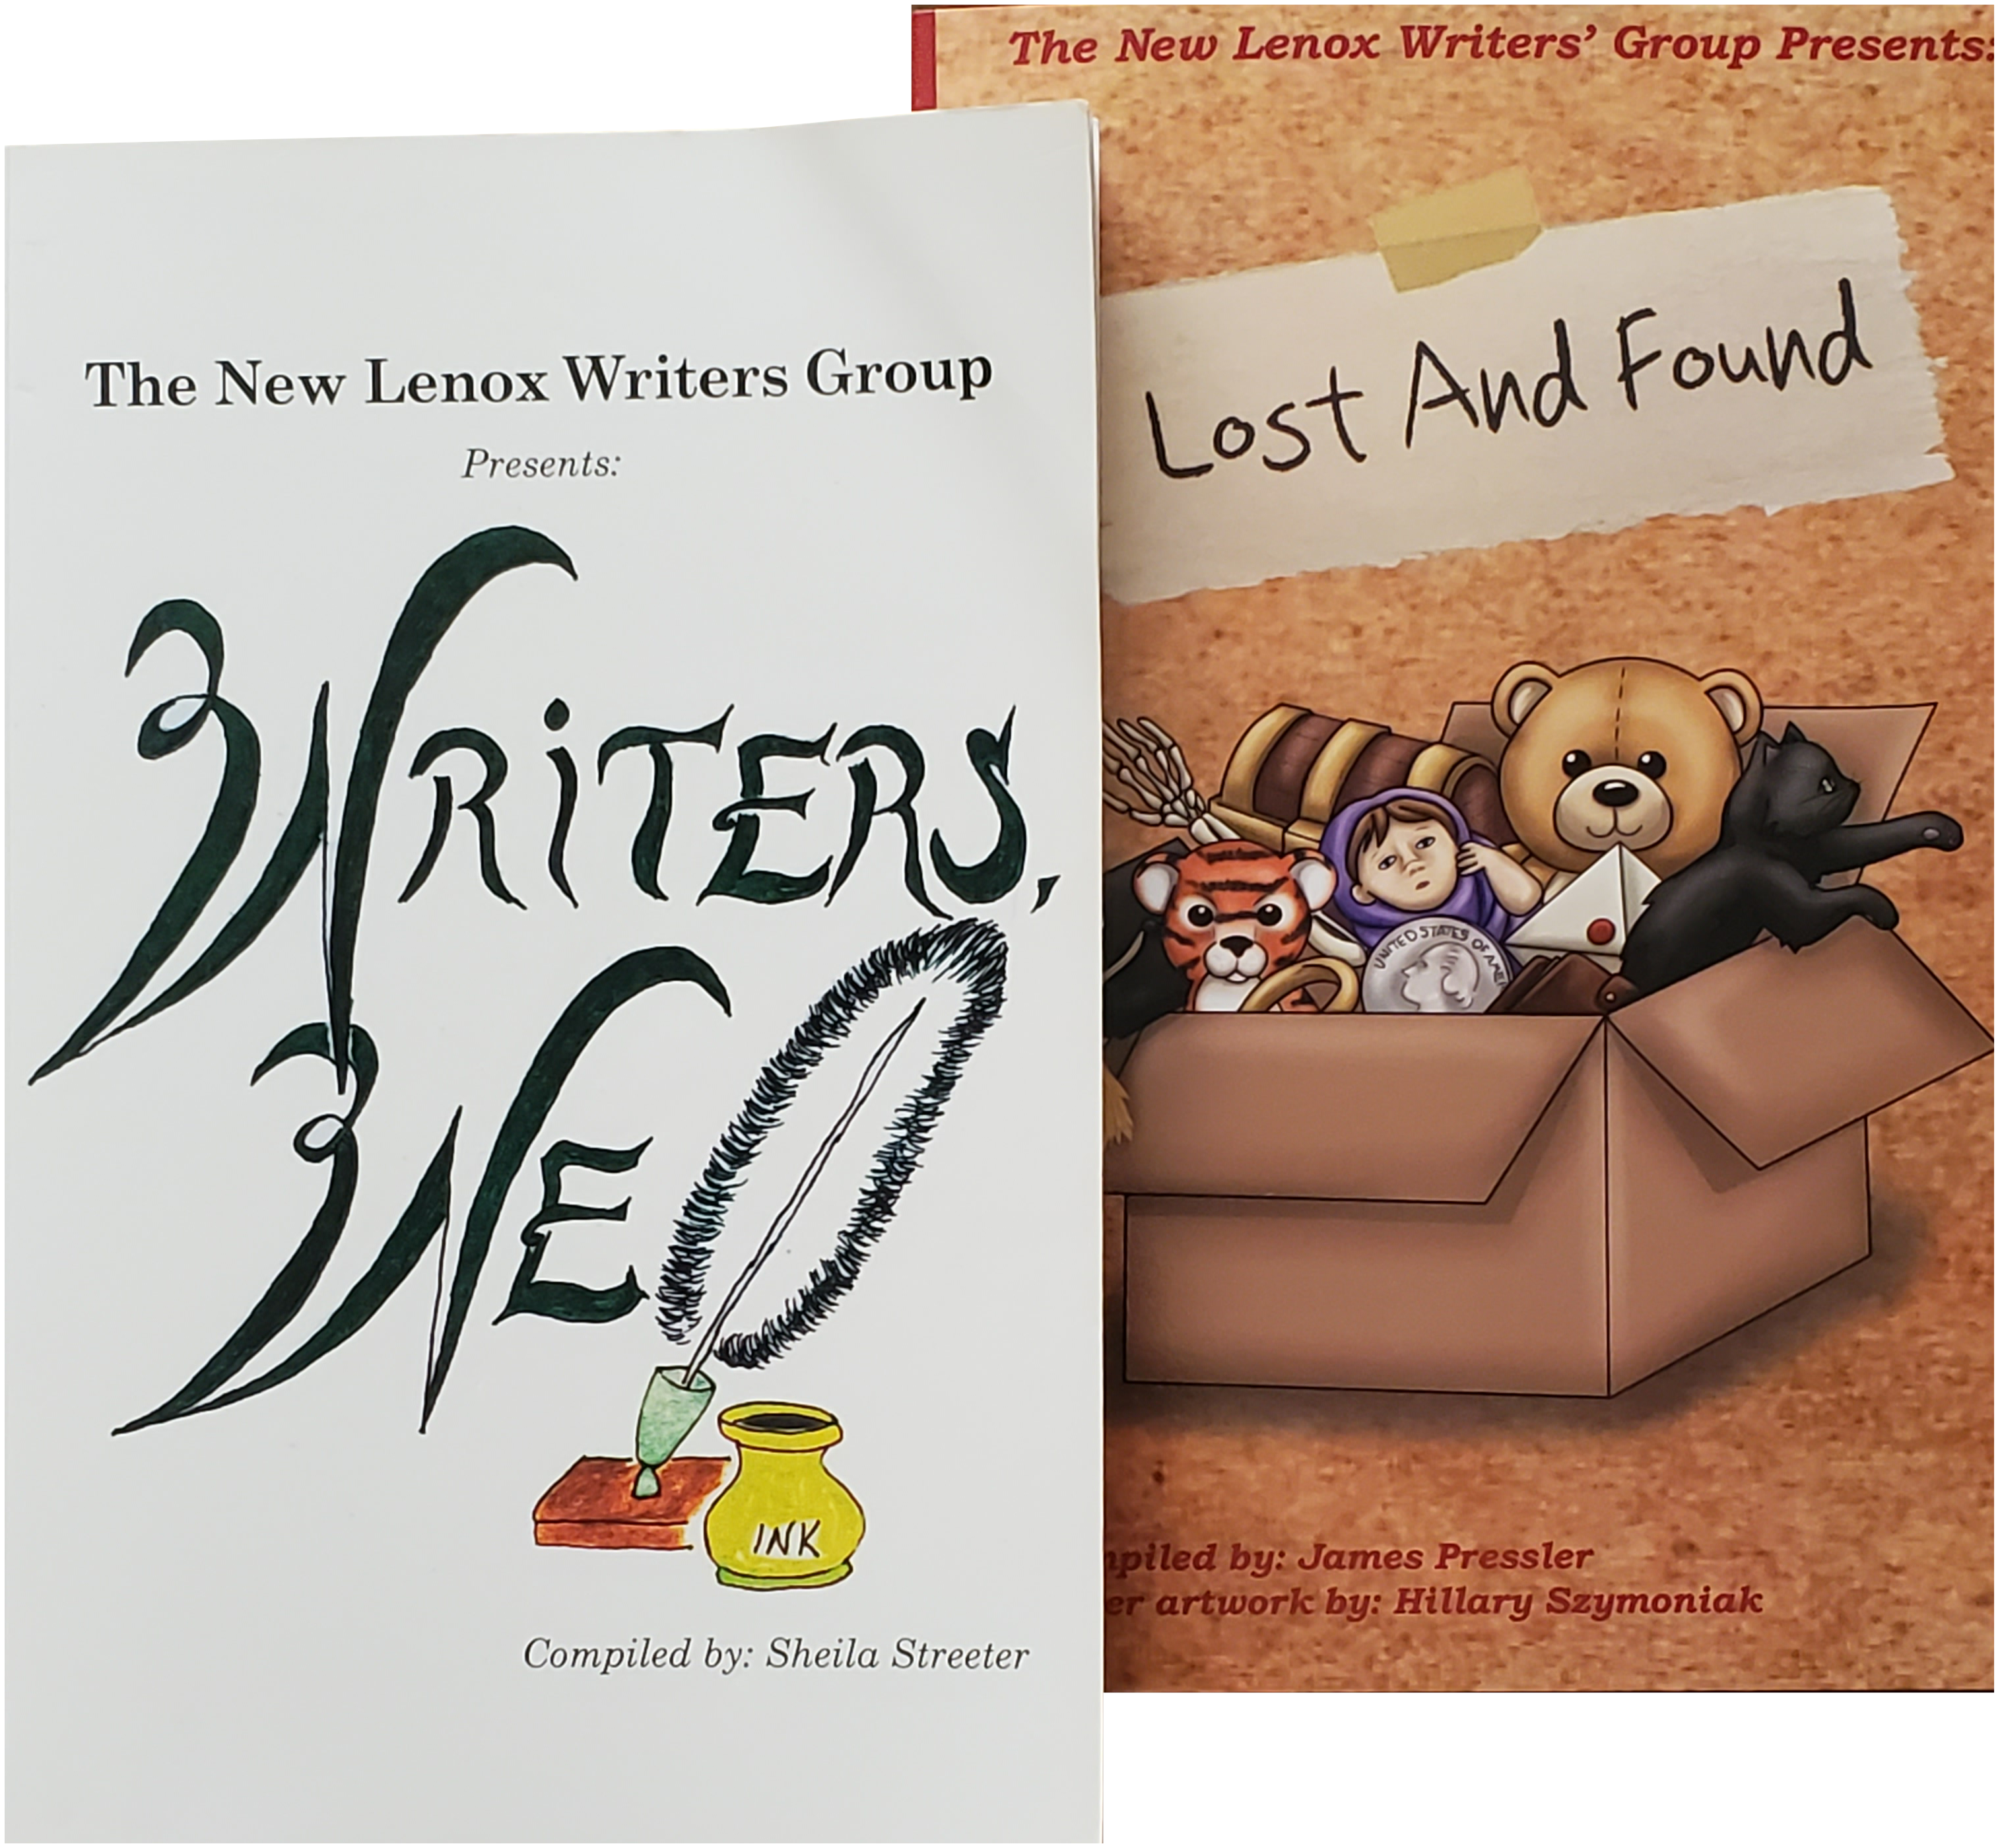 Book covers: "writers, we" and "lost and found"